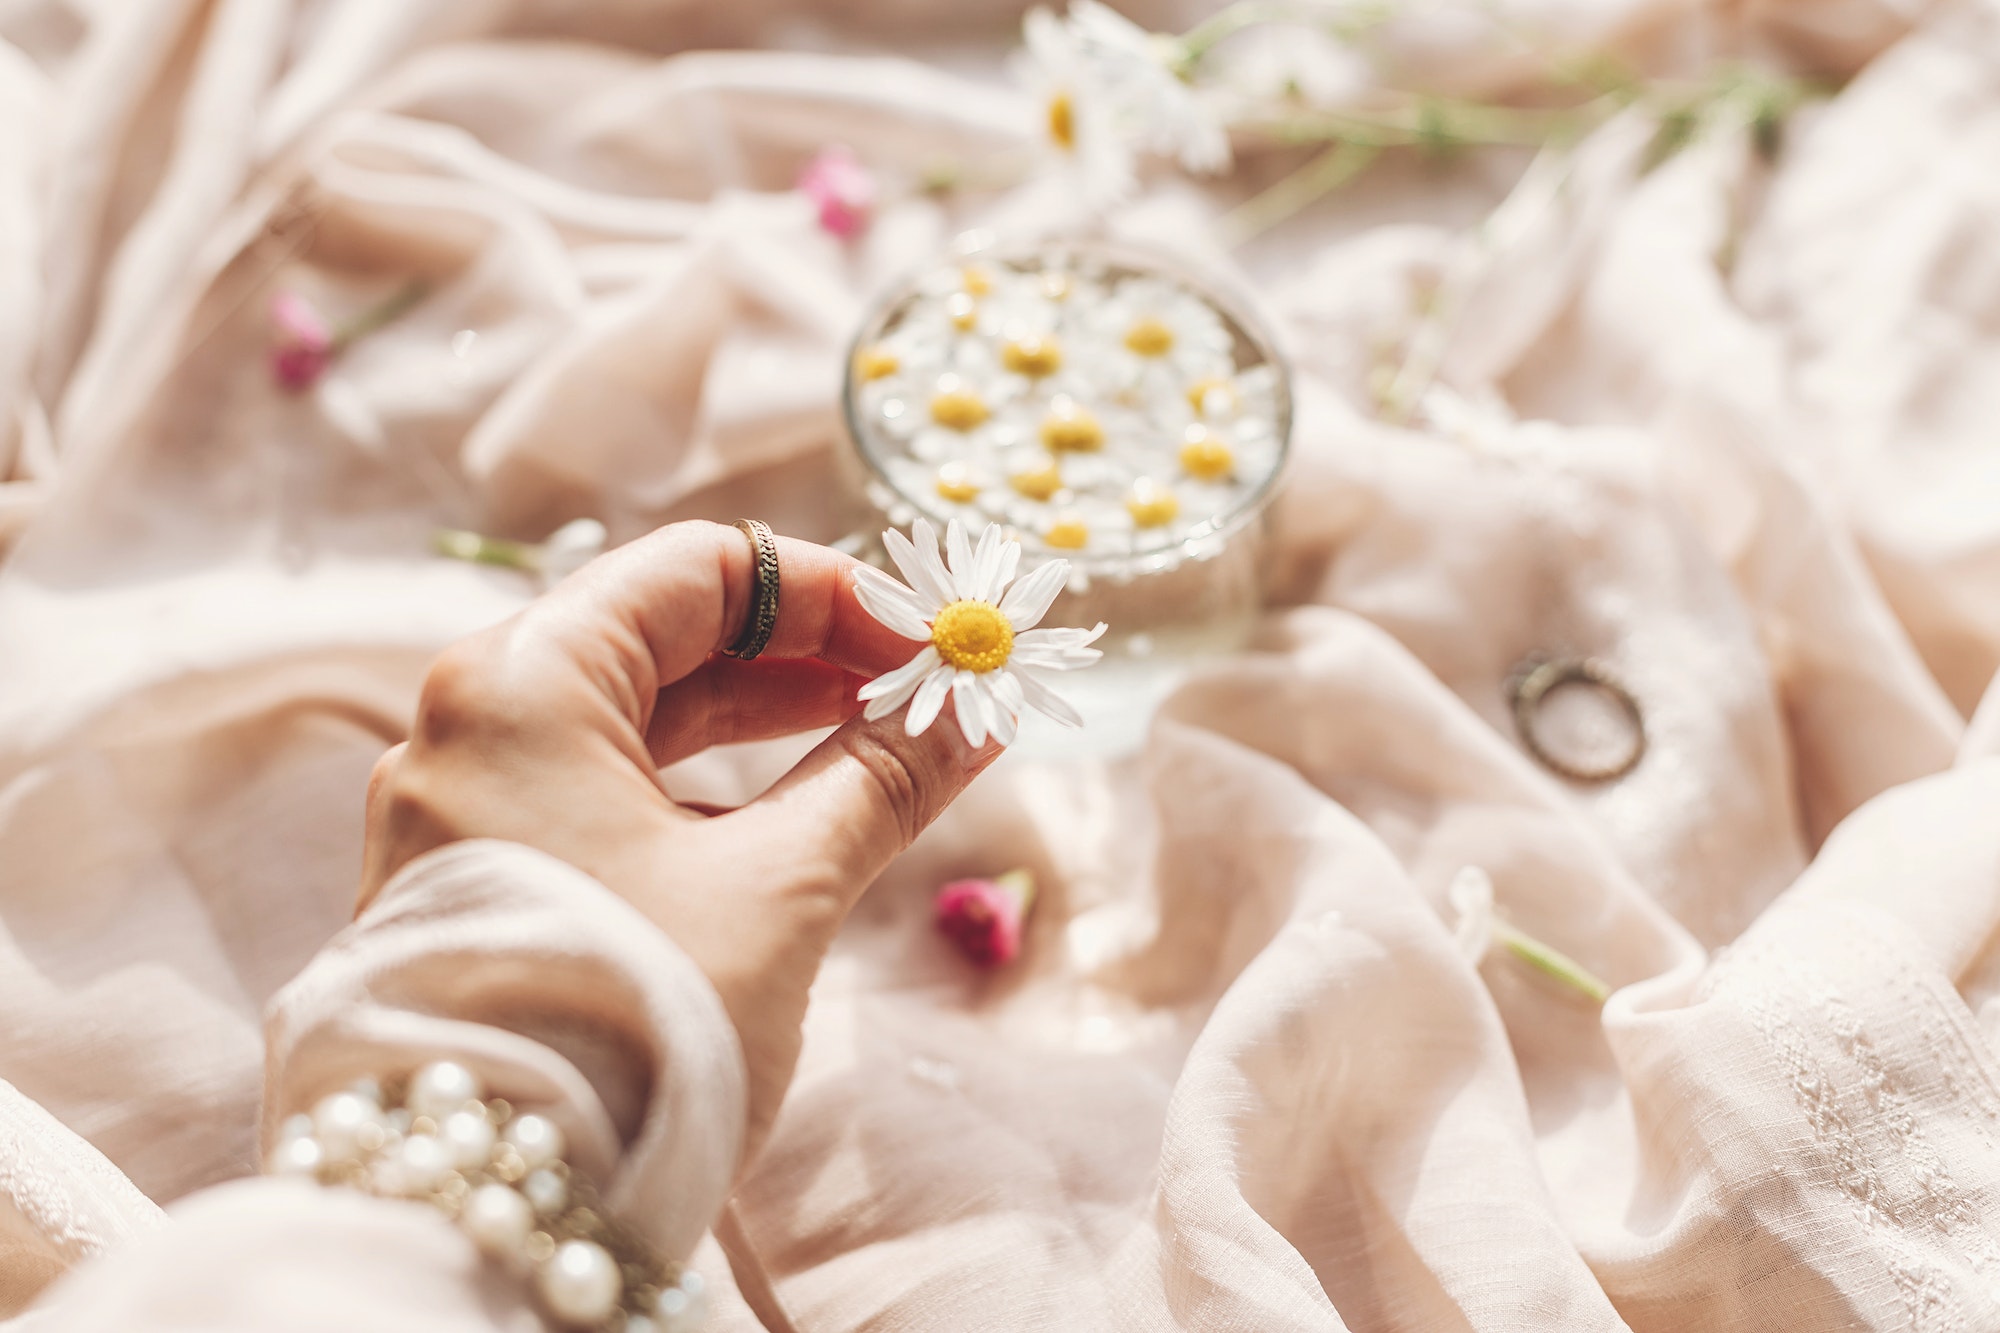 Hand holding daisy flower on background of soft beige fabric with glass cup with flowers